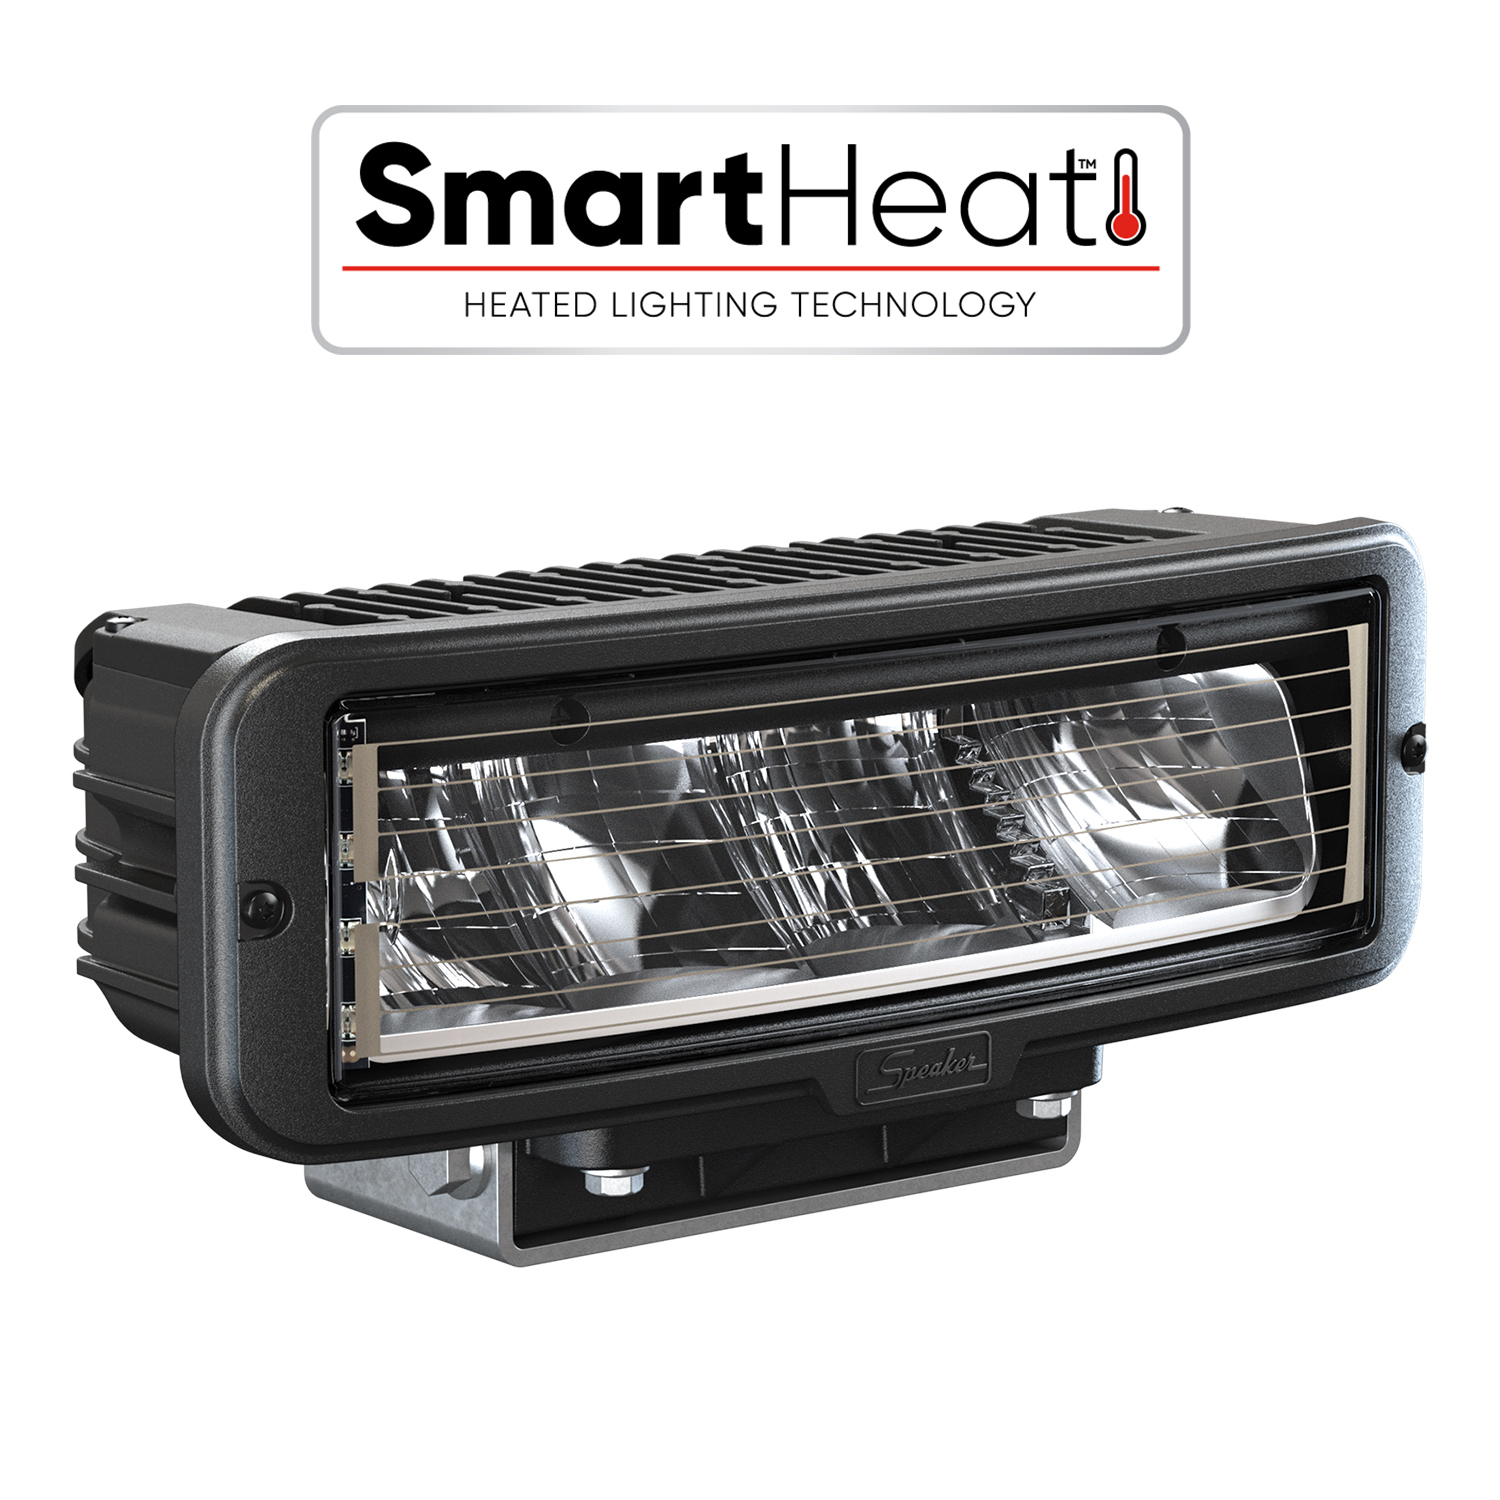 The Model 9800 Heated LED headlights from J.W. Speaker feature SmartHeat technology to automatically de-ice lneses!